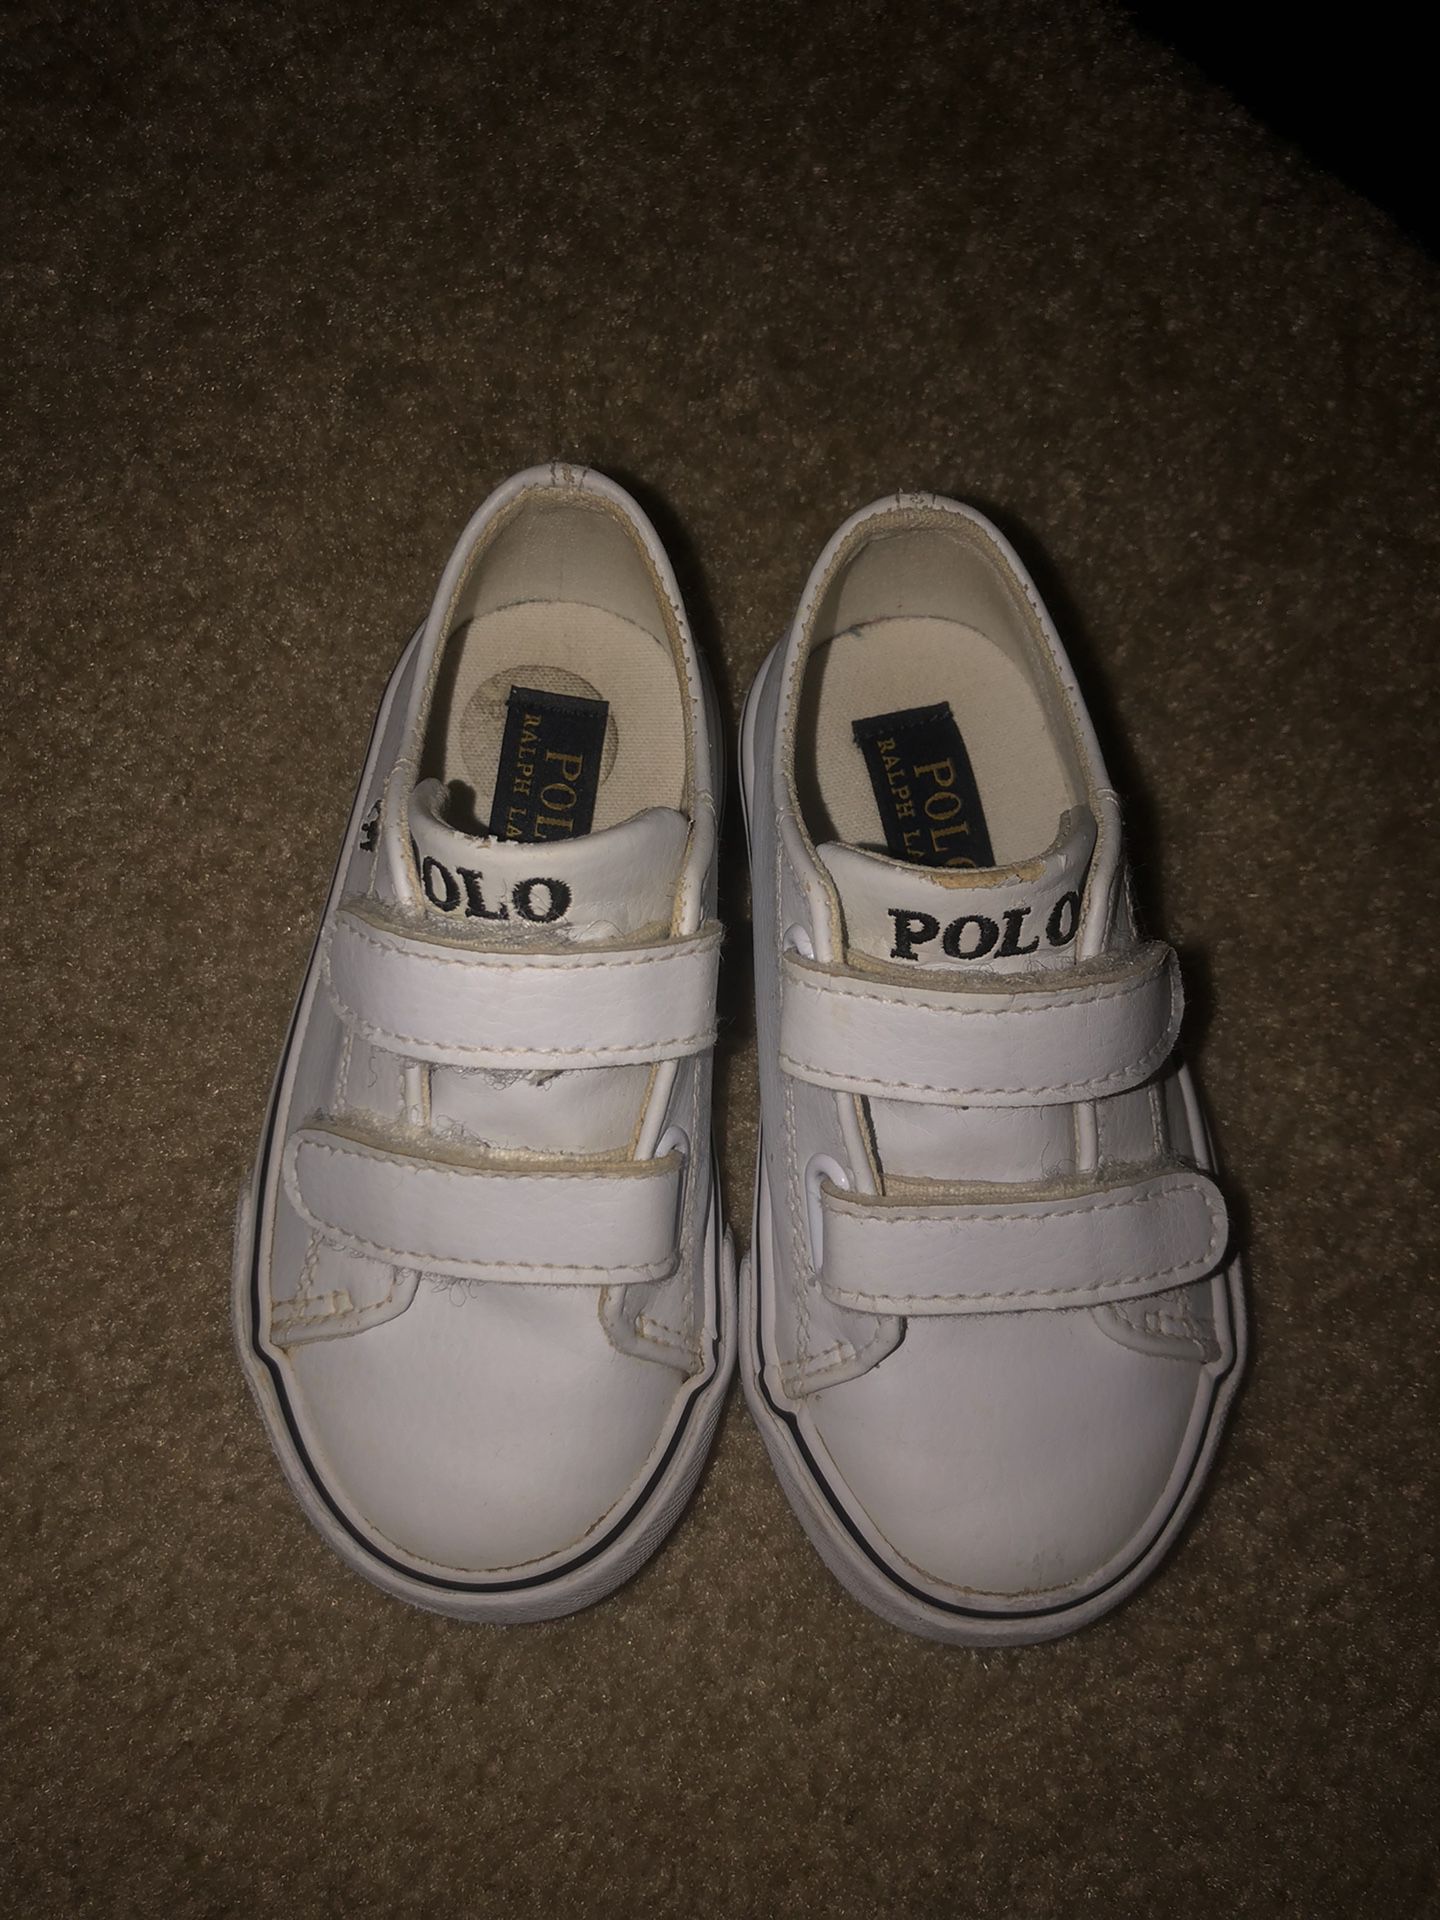 Polo Ralph Lauren Sneakers Size 7 Toddler 